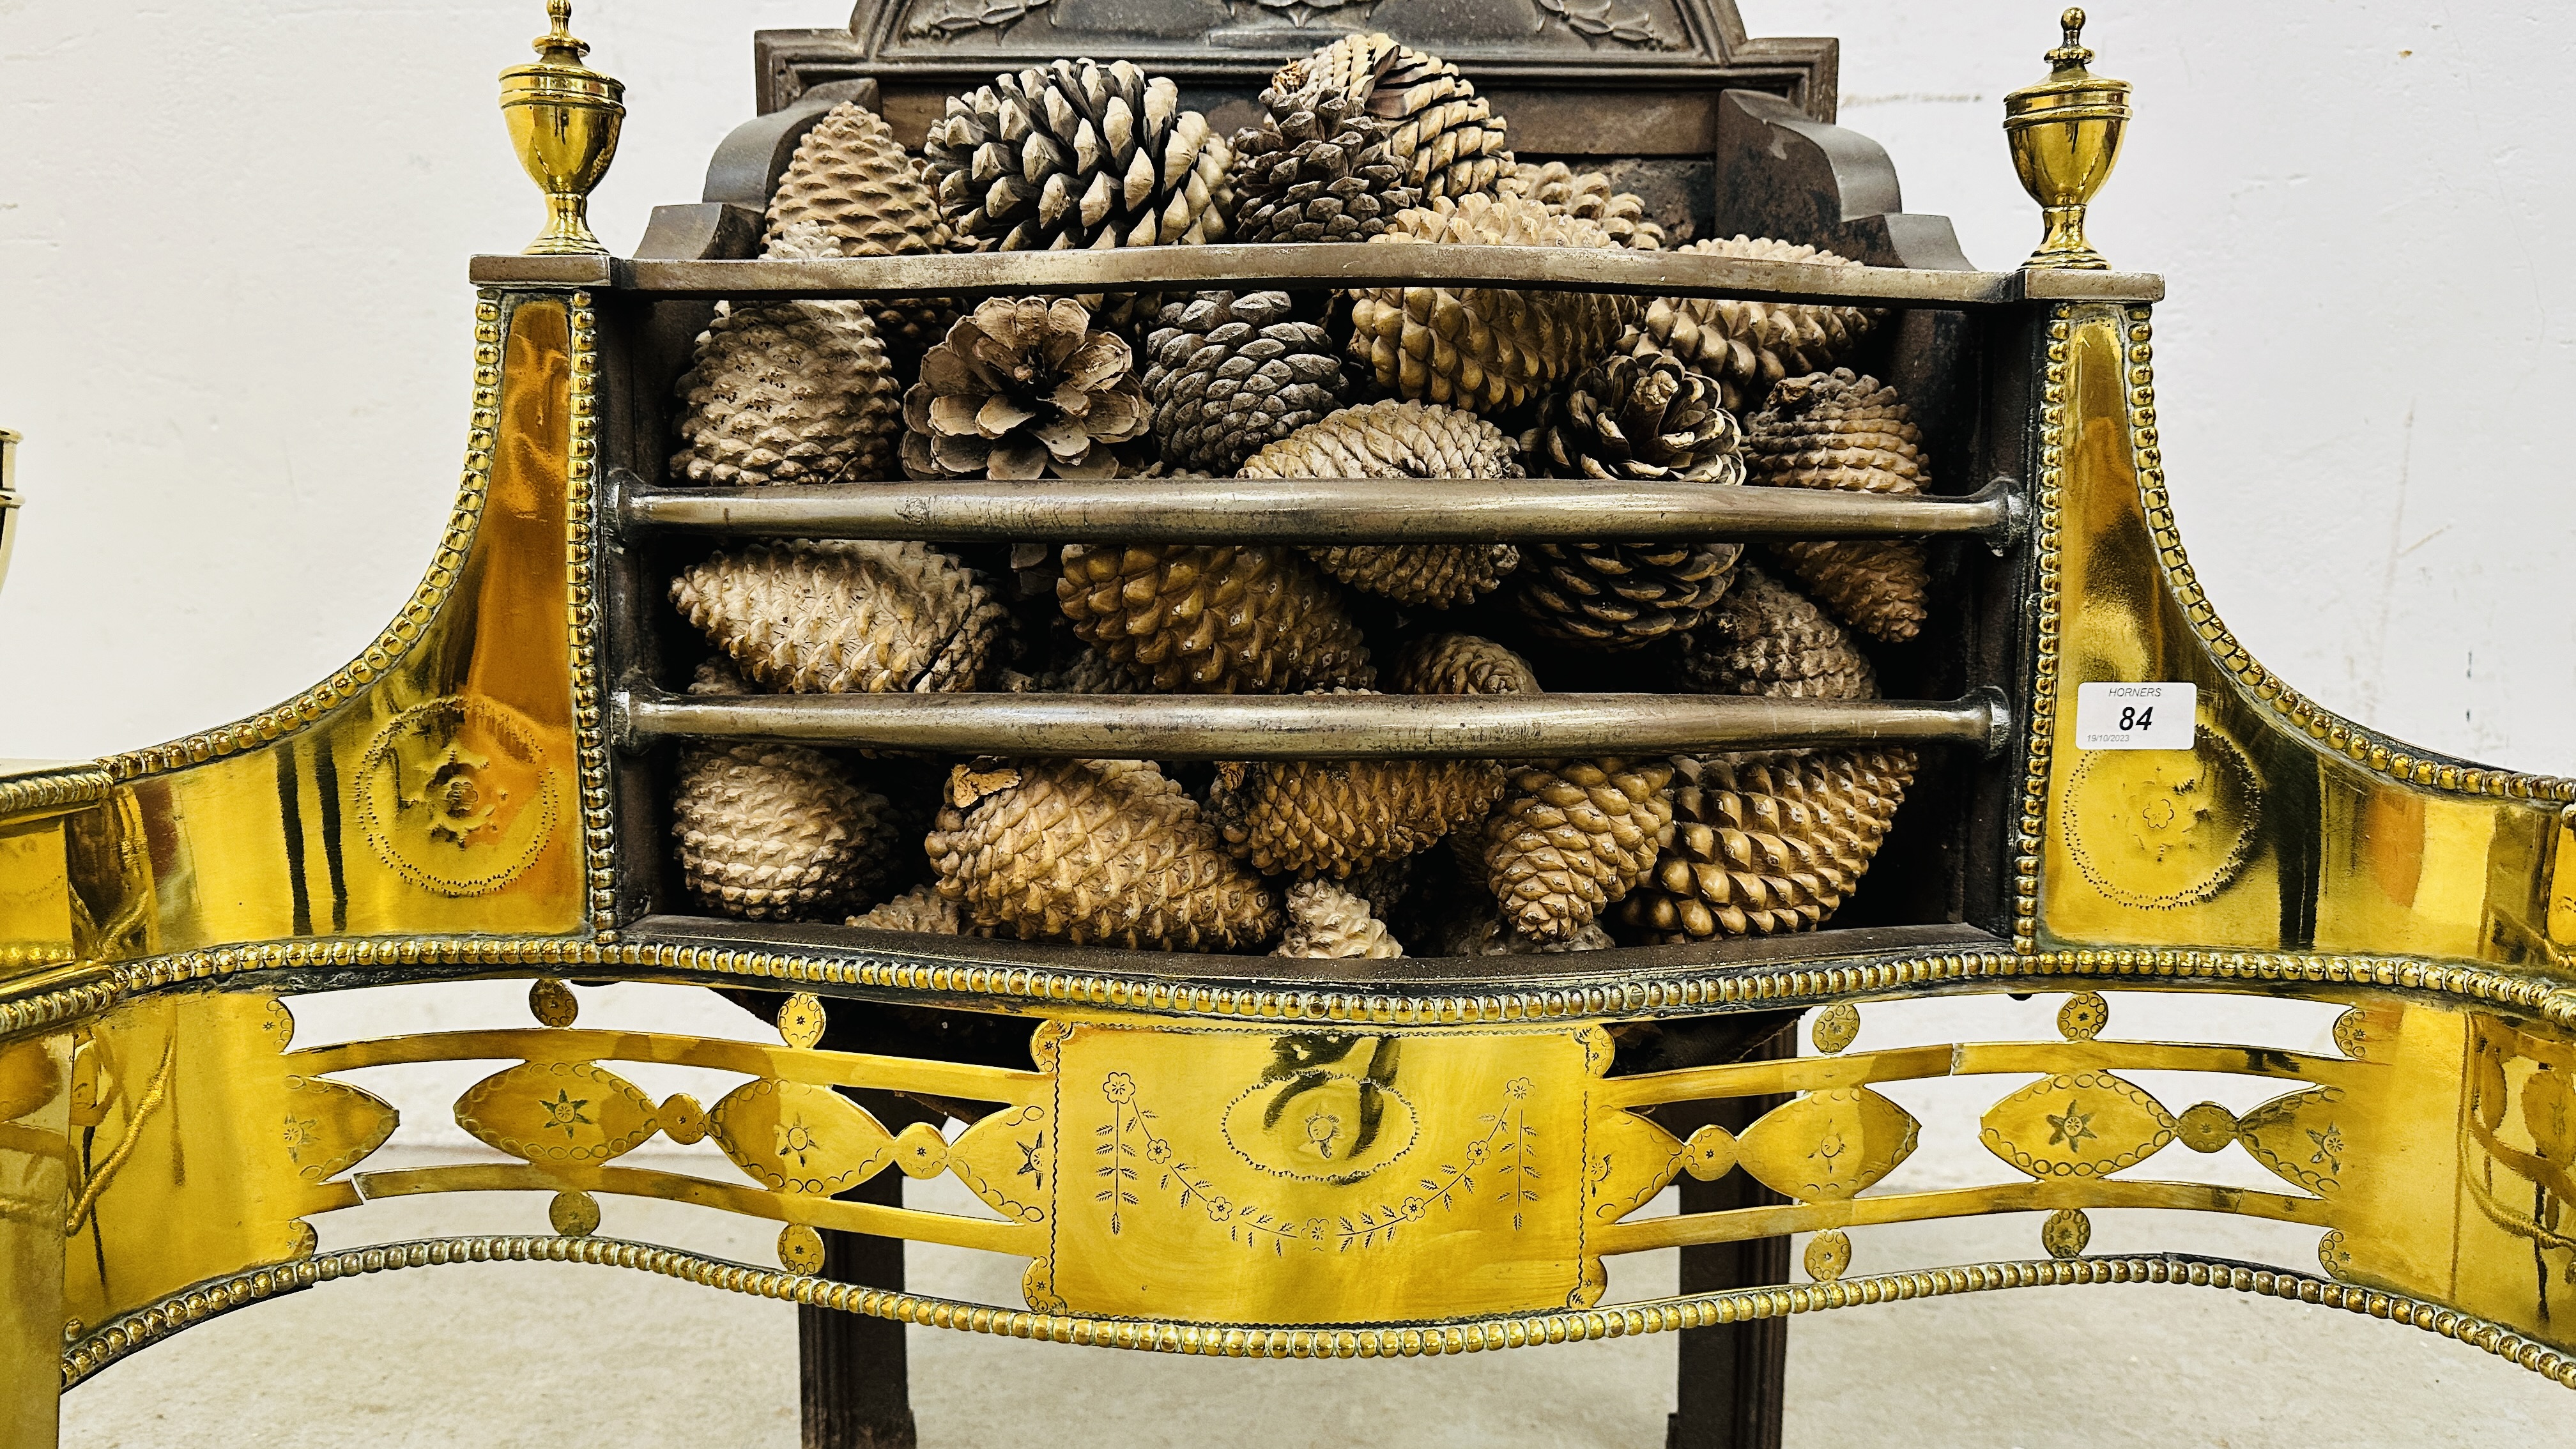 IMPRESSIVE HEAVY CAST FIRE BASKET WITH BRASS DETAILING - OVERALL WIDTH 83CM. - Image 3 of 11